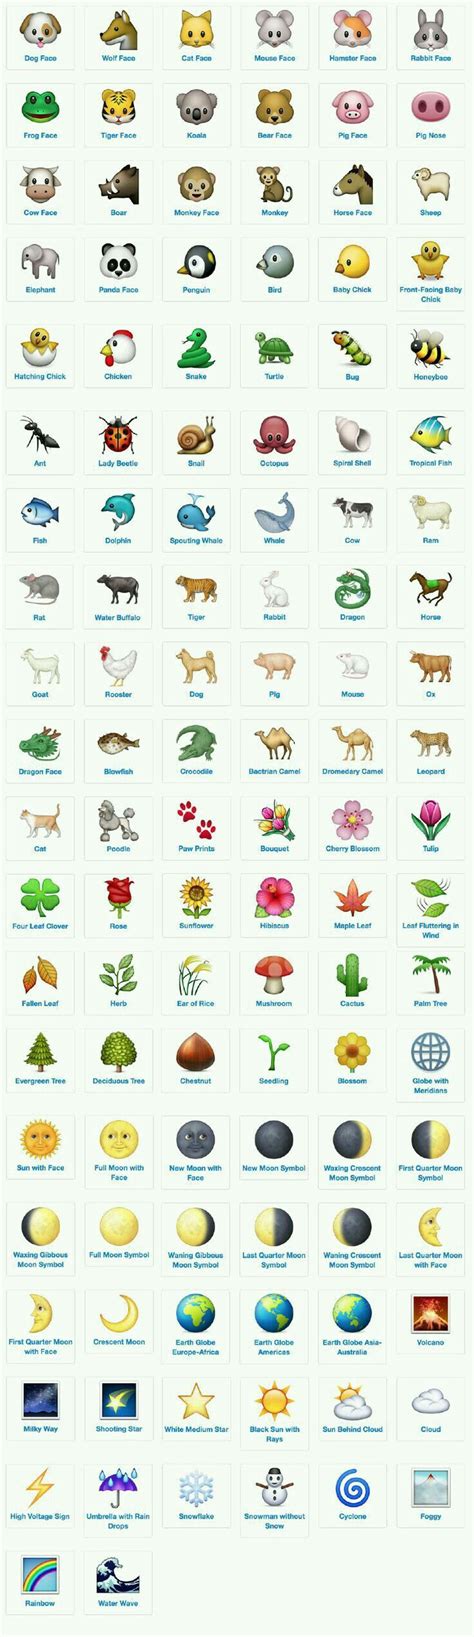 Search for iphone and android emojis with options to browse every emoji by name, category, or keyword. Pin by Bliss on Emoji | Emoji art, Emoji chart, Emojis ...